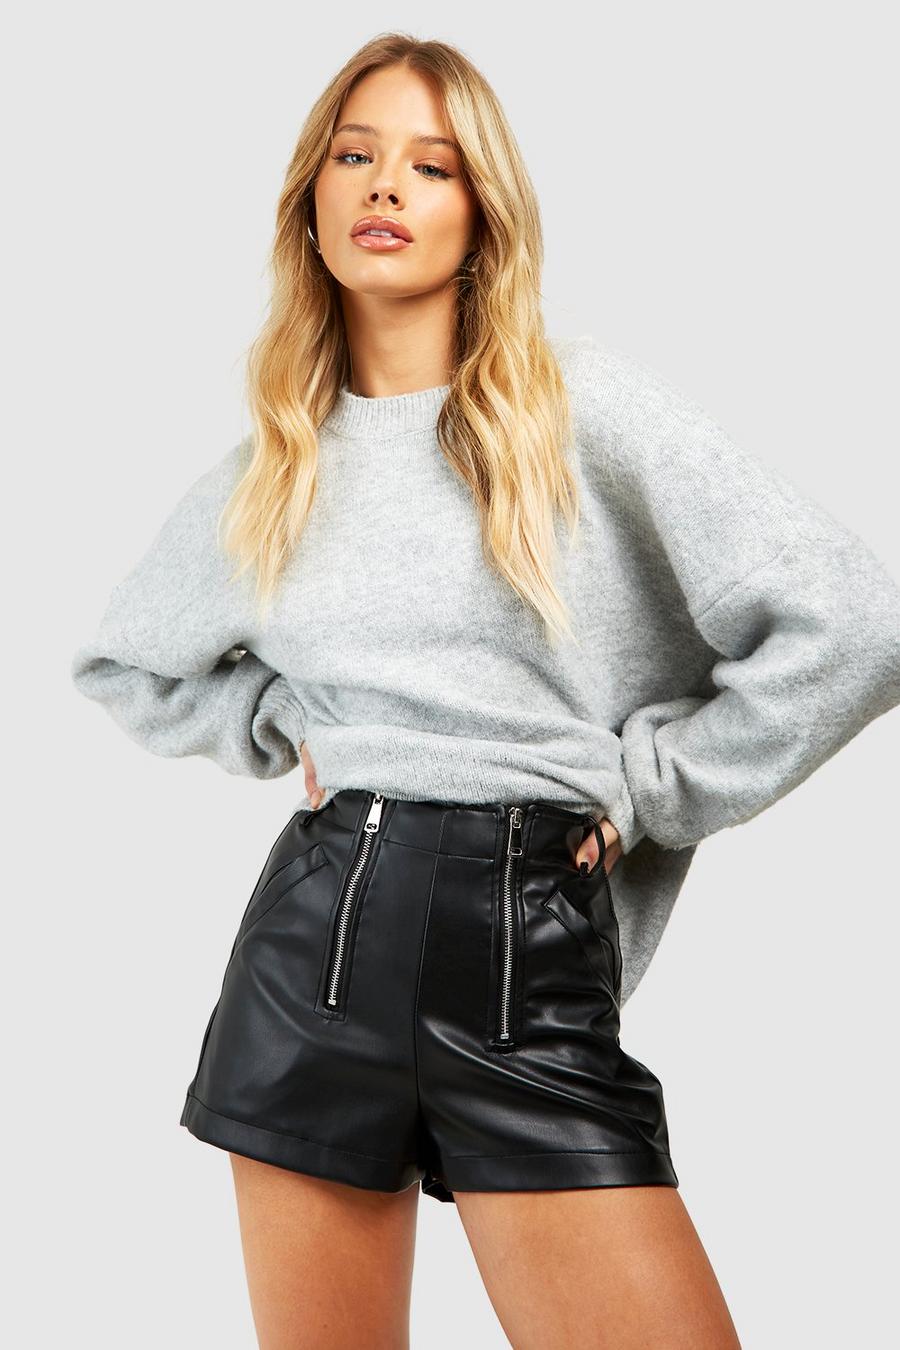 ASOS DESIGN faux leather shorts in black